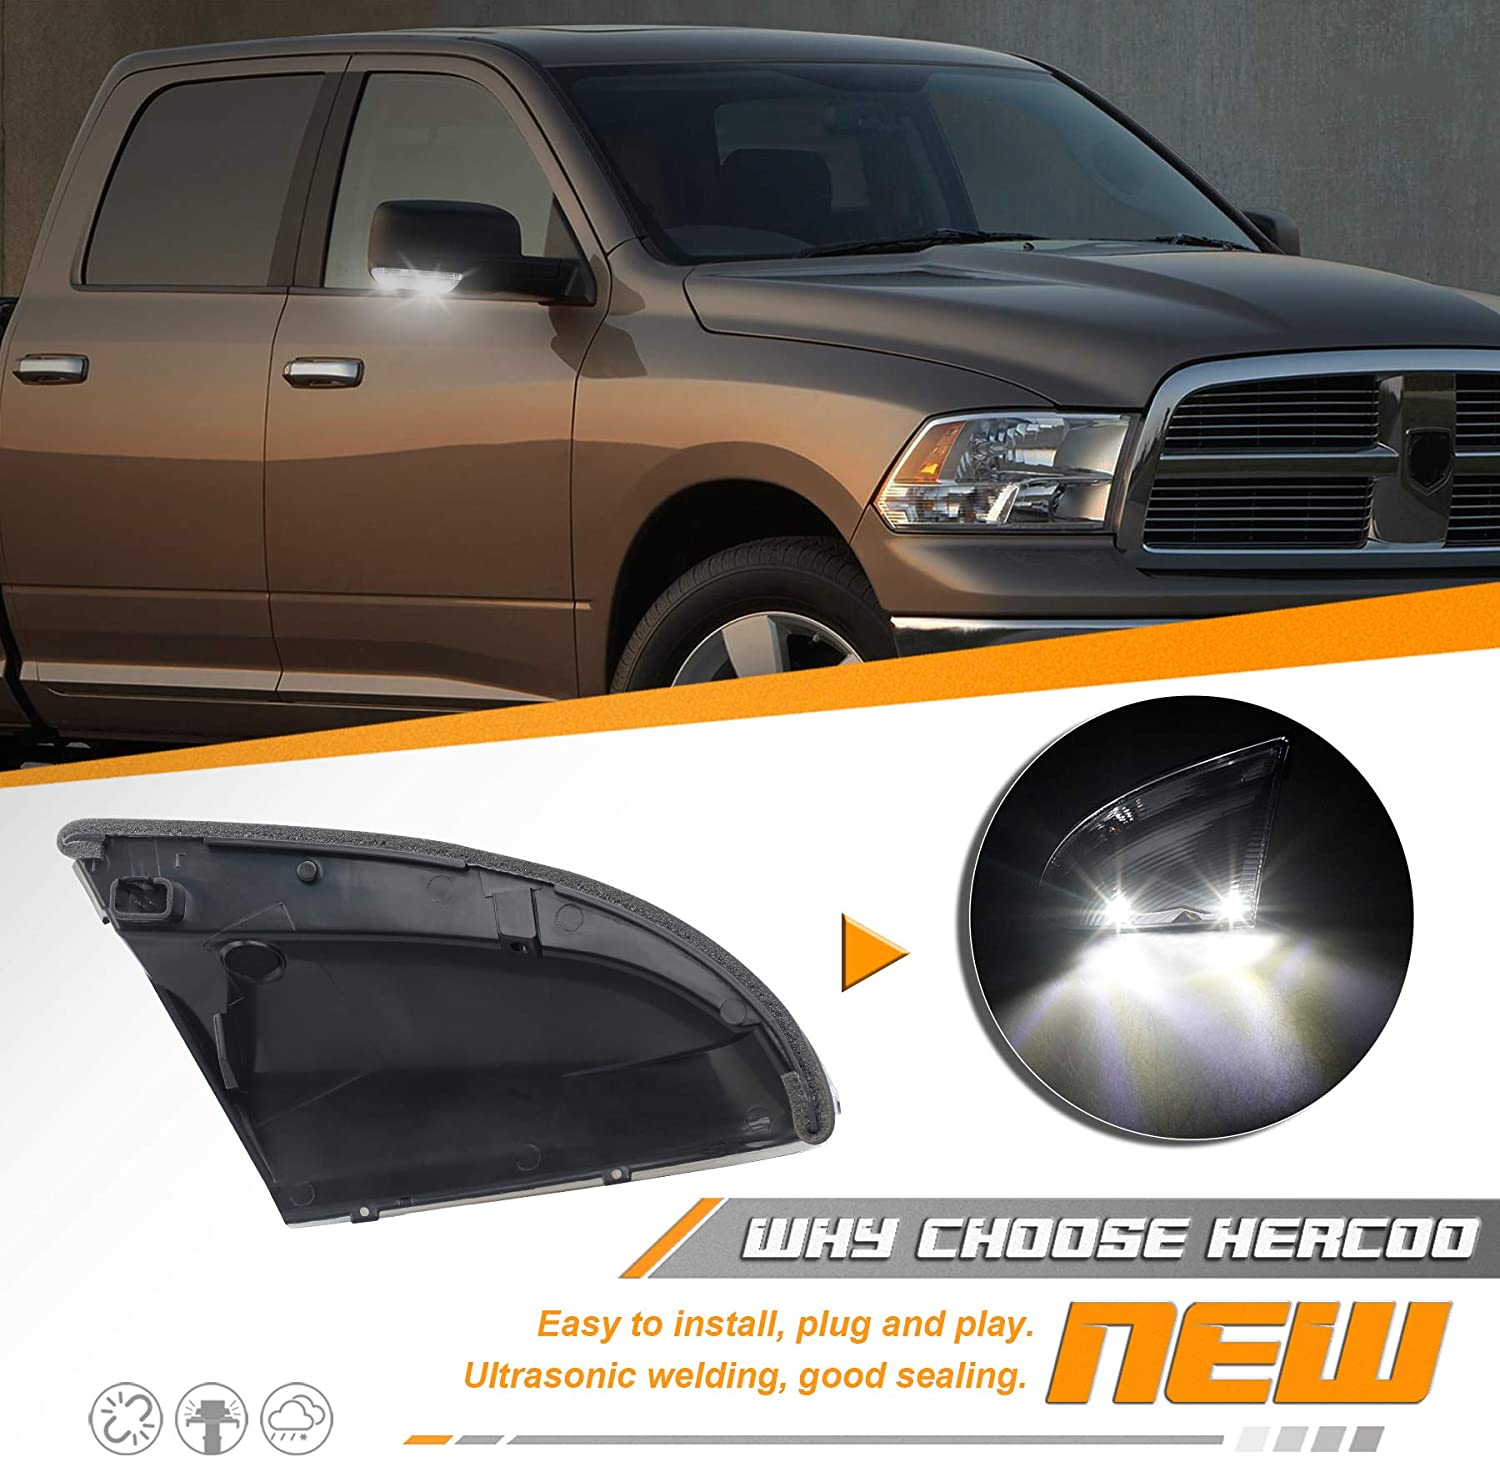 HERCOO LED Side Mirror Turn Signal Puddle Light Lamp Assembly Compatible with Dodge Ram 1500 2009-2018, Dodge Ram 2500 2010-2018, Ram 1500 Classic 2019-2022, Replacement for 68064948AA